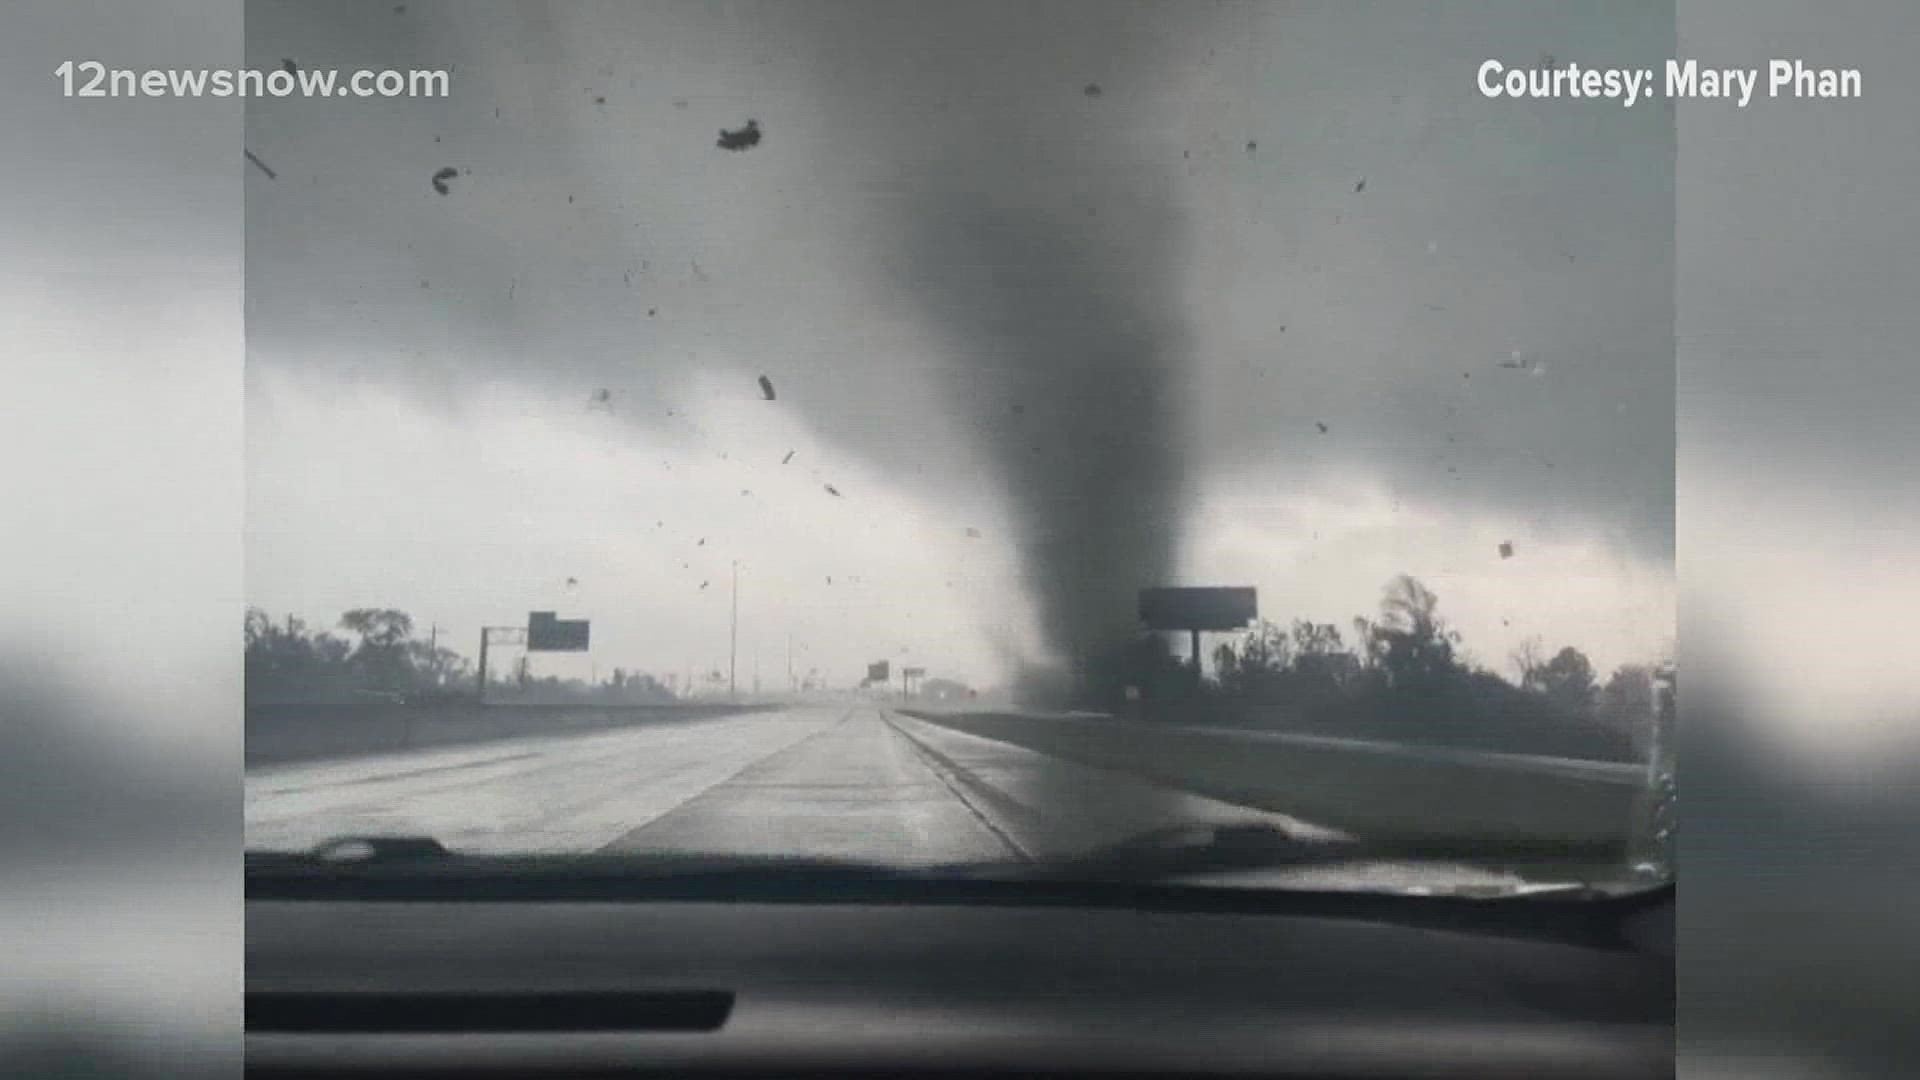 The tornado had winds of 120 mph and could be compared to a category 3 hurricane in terms of damage potential.